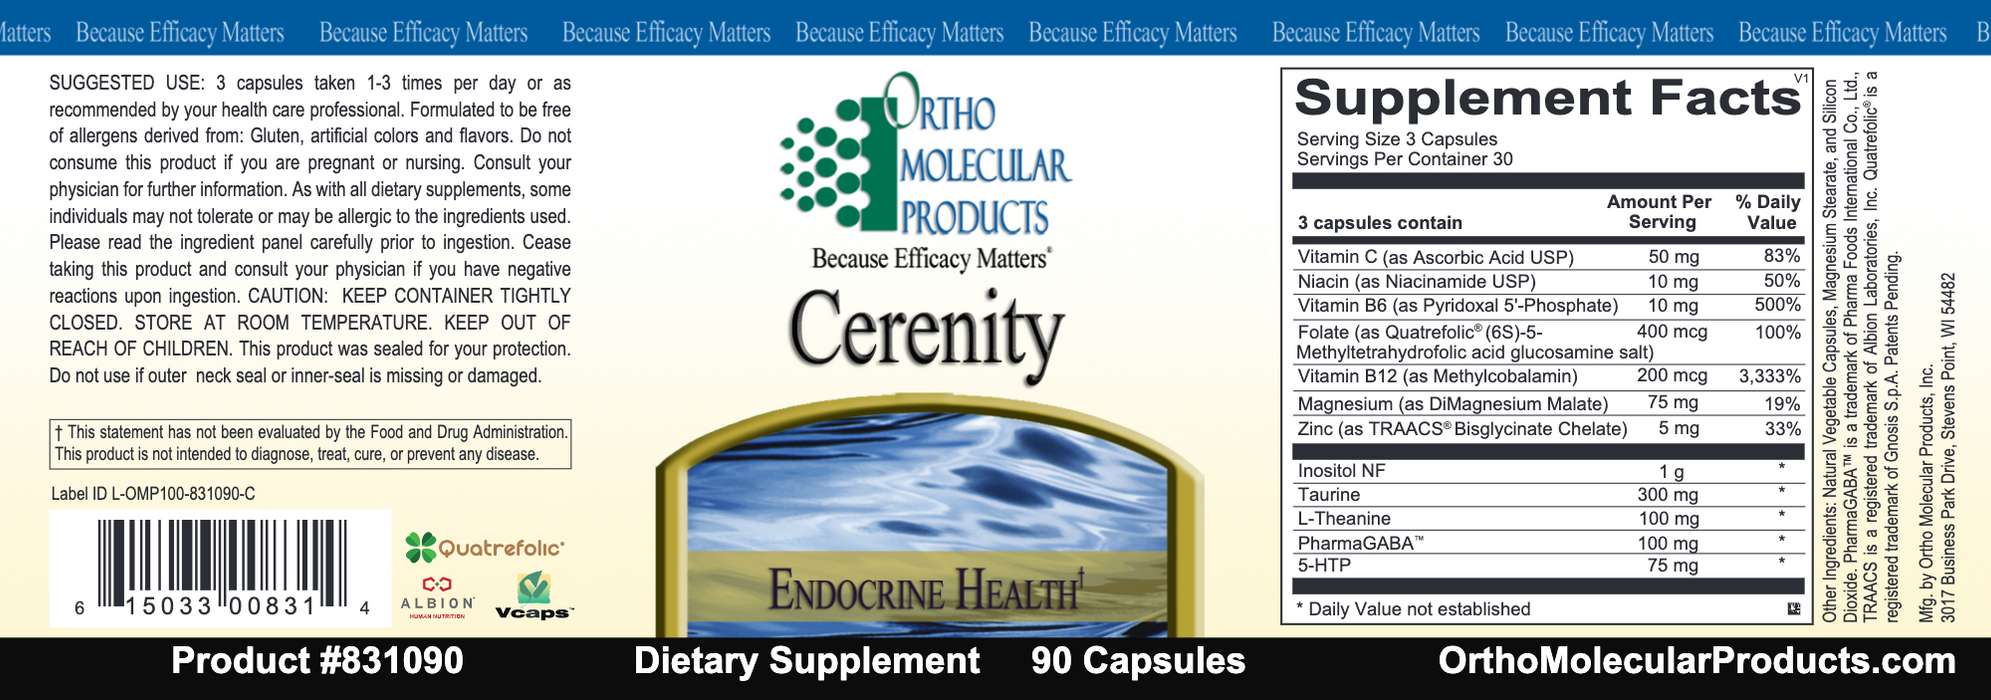 Cerenity (90 Capsules)-Vitamins & Supplements-Ortho Molecular Products-Pine Street Clinic